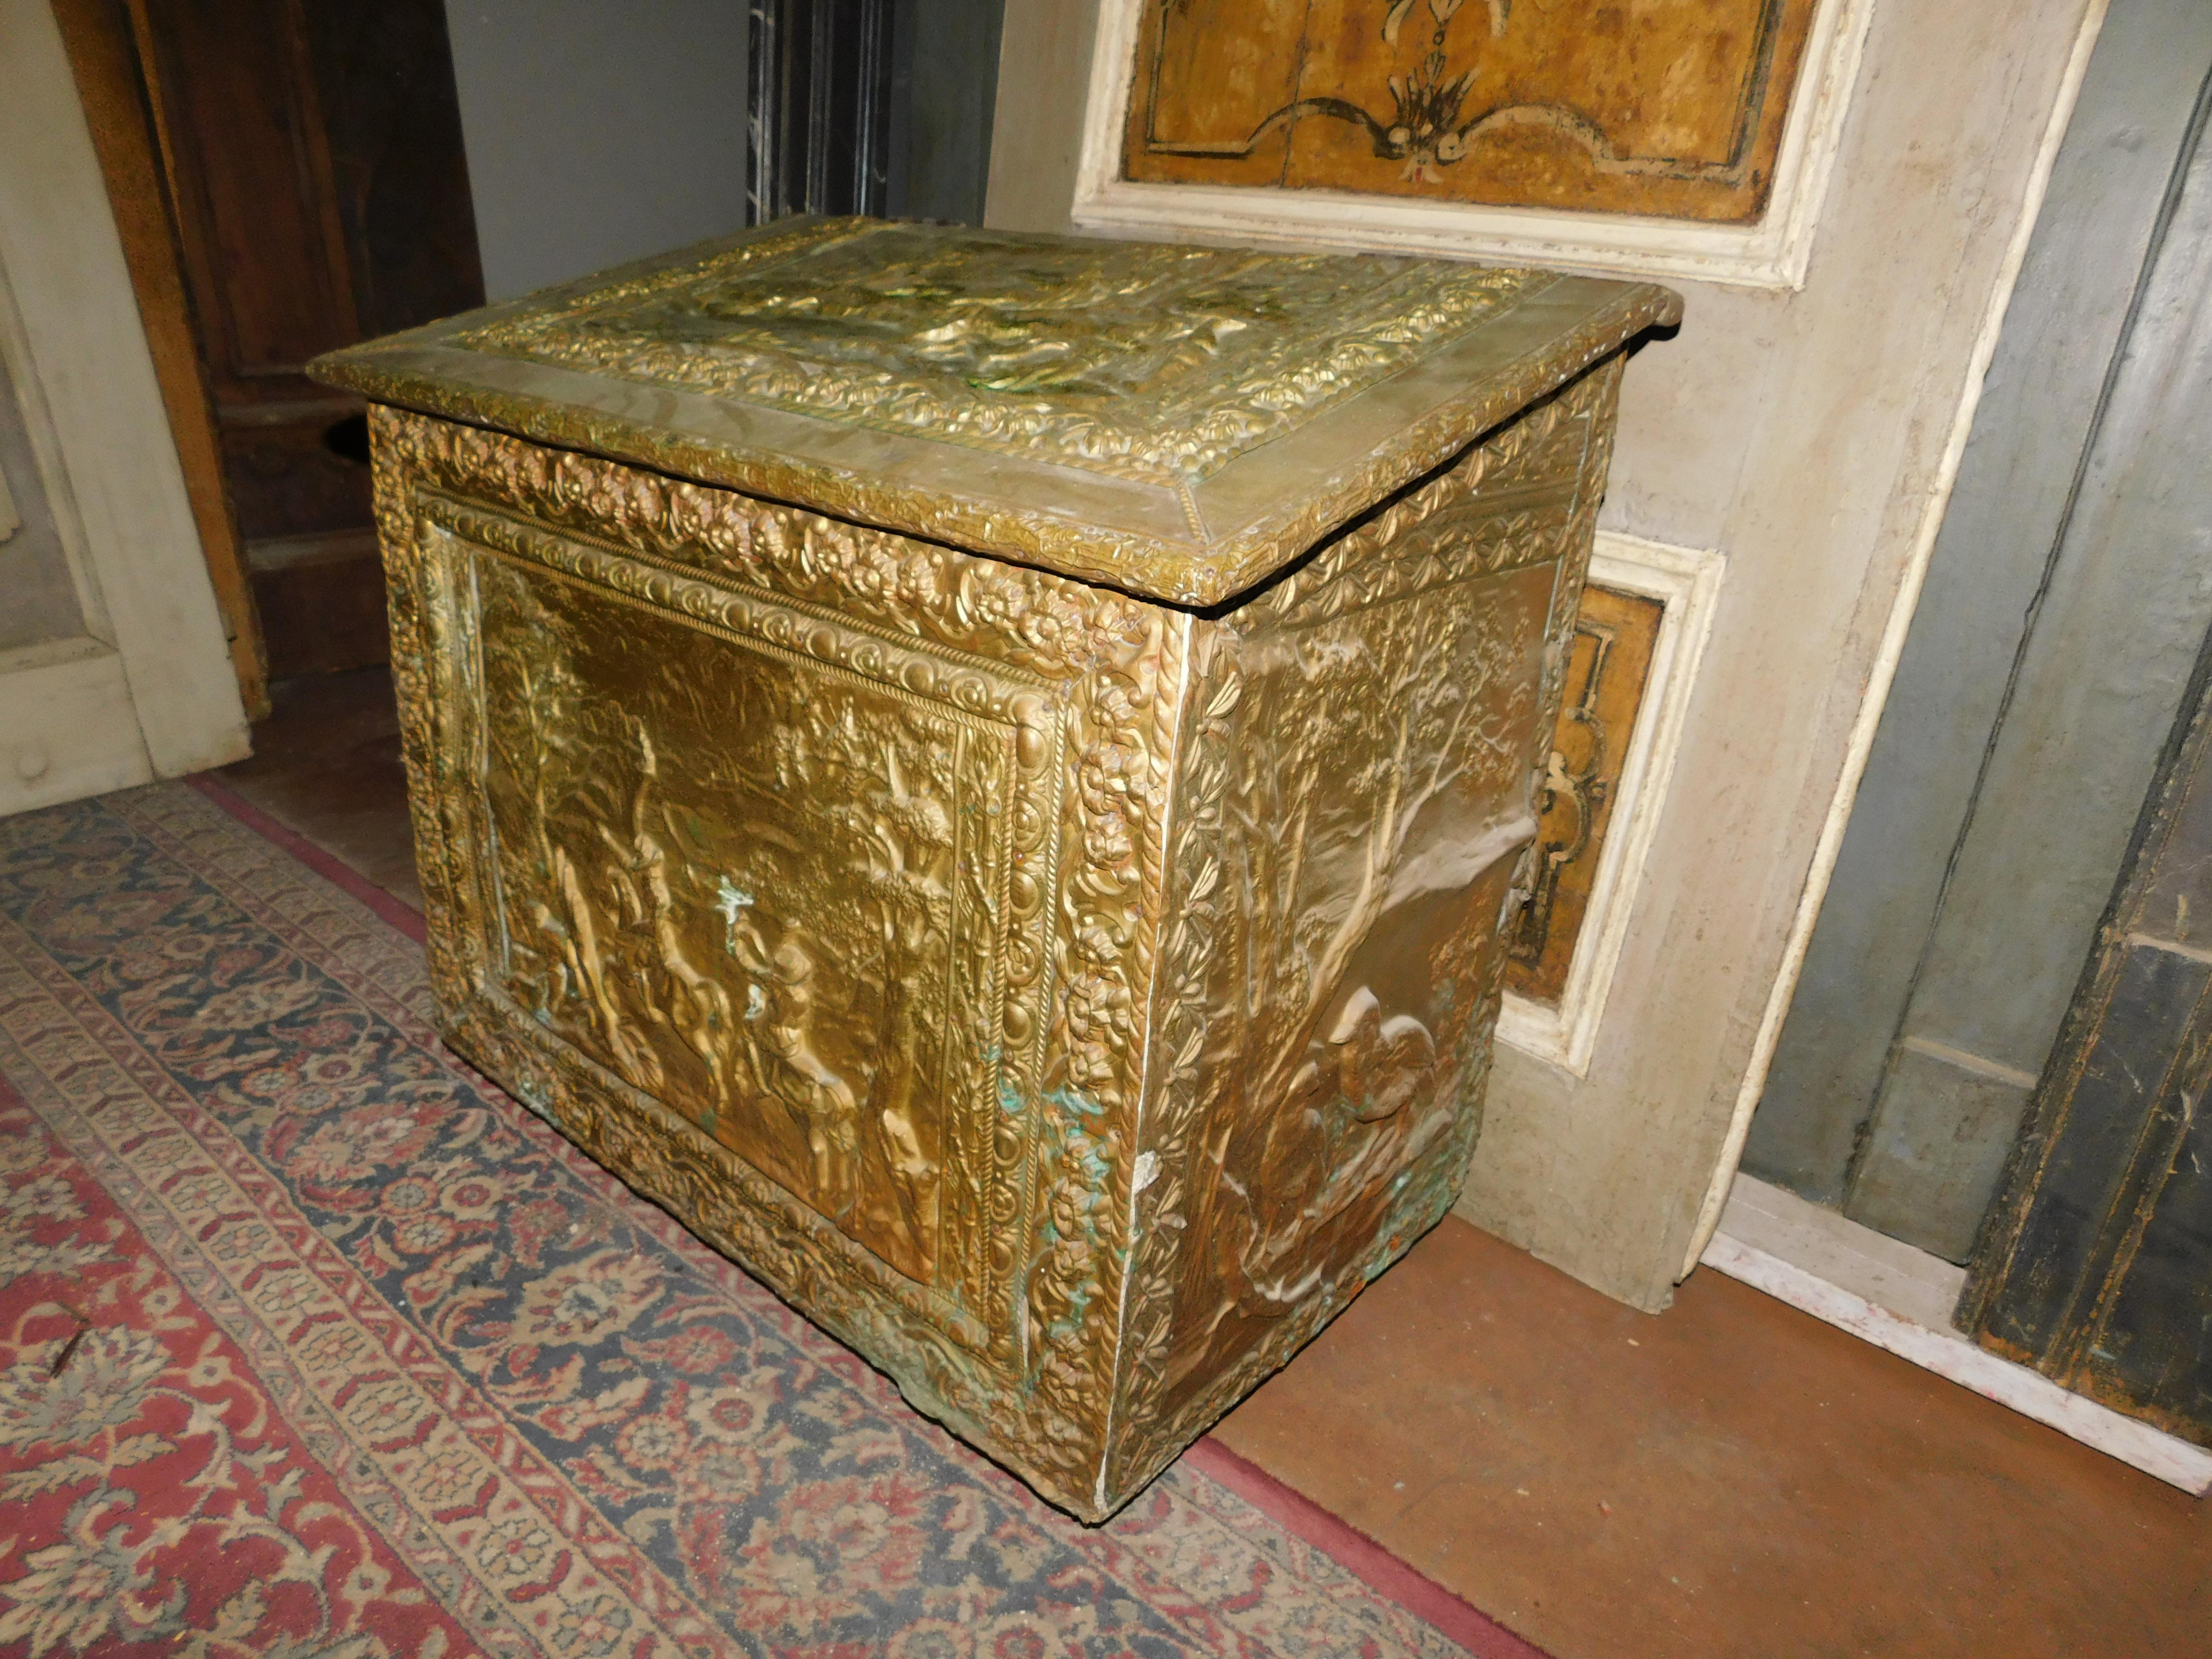 Antique firewood holder in embossed brass, period 1800 from France, richly decorated with figures of everyday life of the time. Usable as a laundry basket, or at the bottom of the bed, or as a play chest, it lends itself to many current uses,